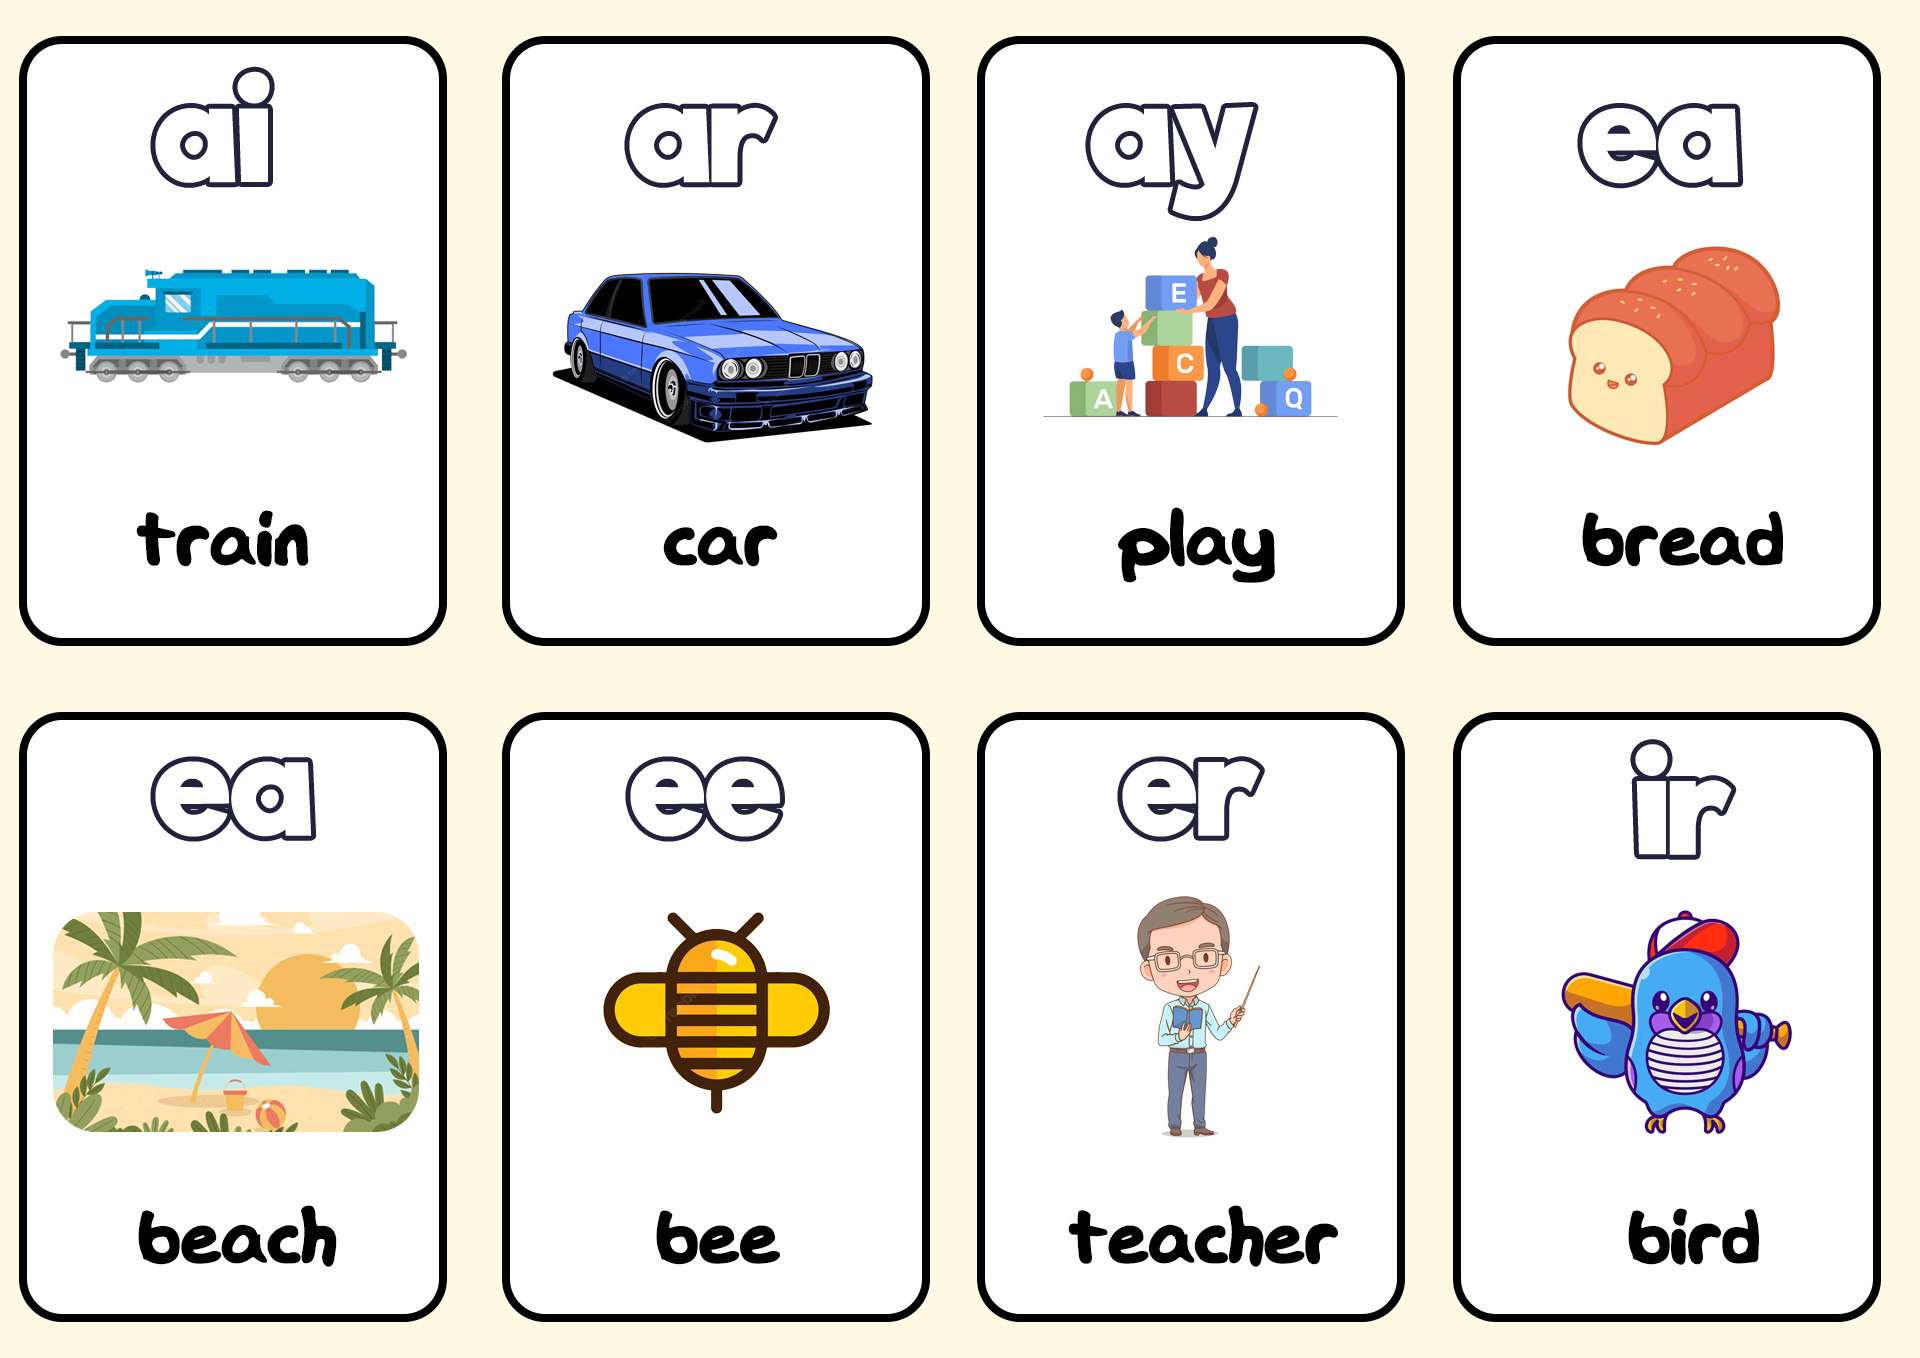 Vowel Digraph Cards Image